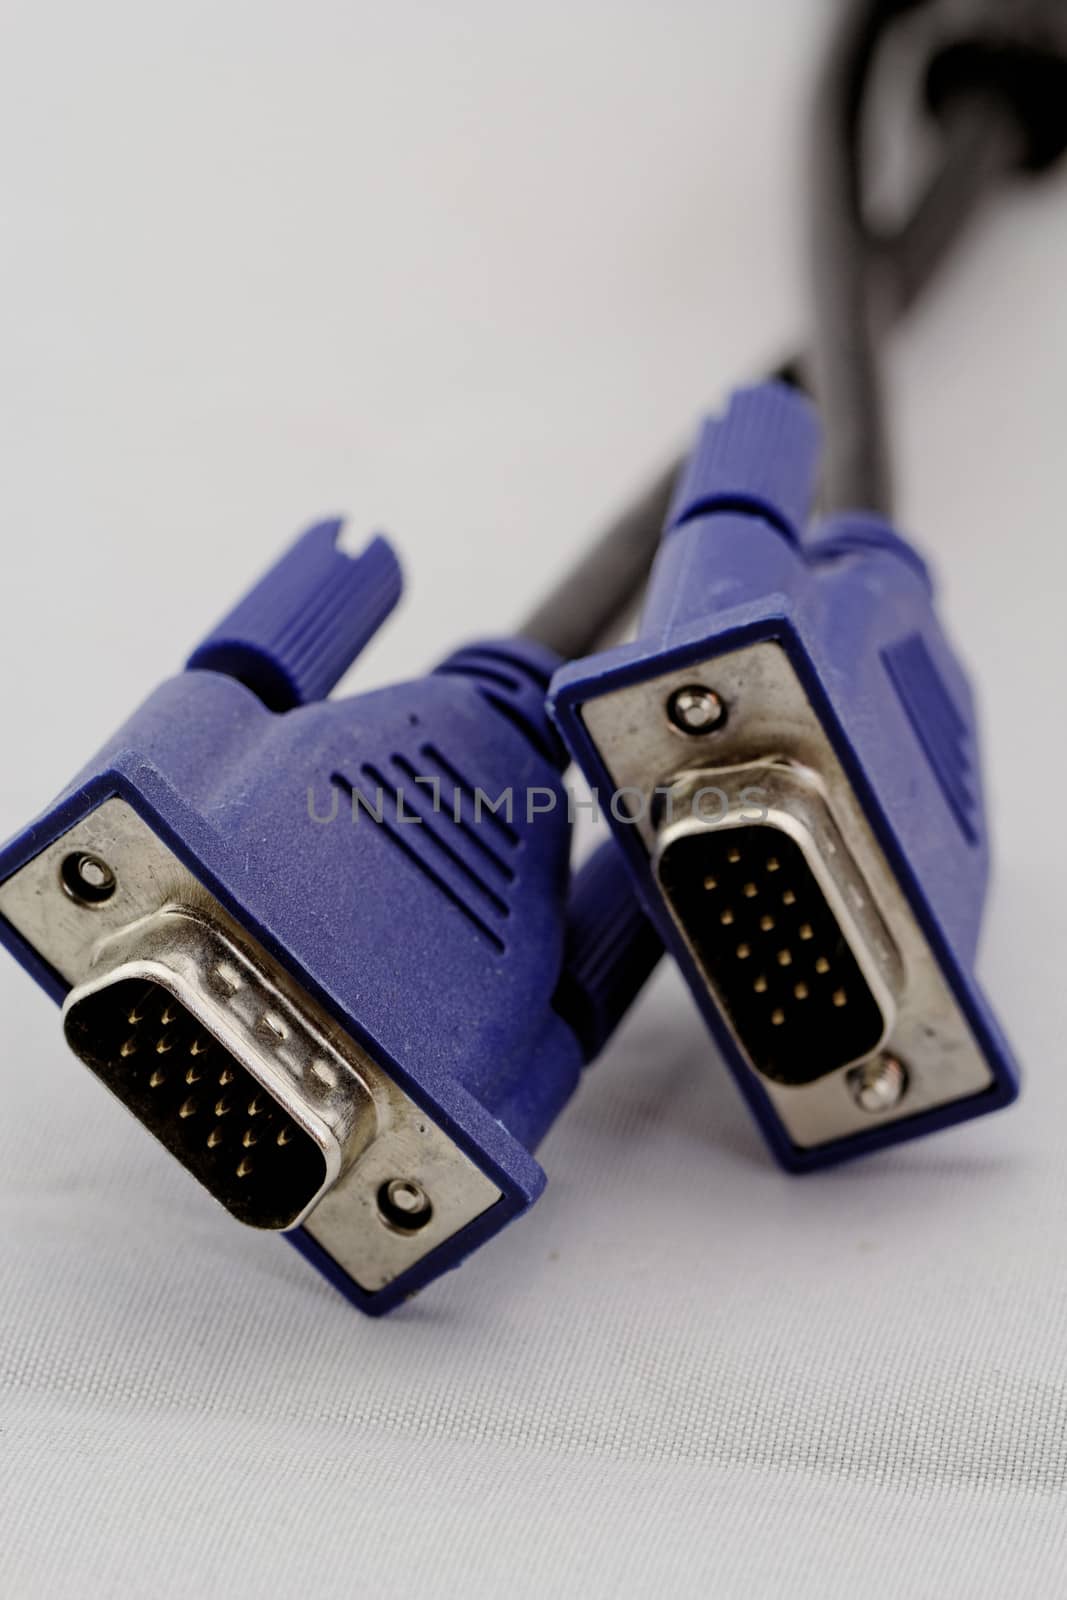 black VGA monitor Cable with blue Connector on white